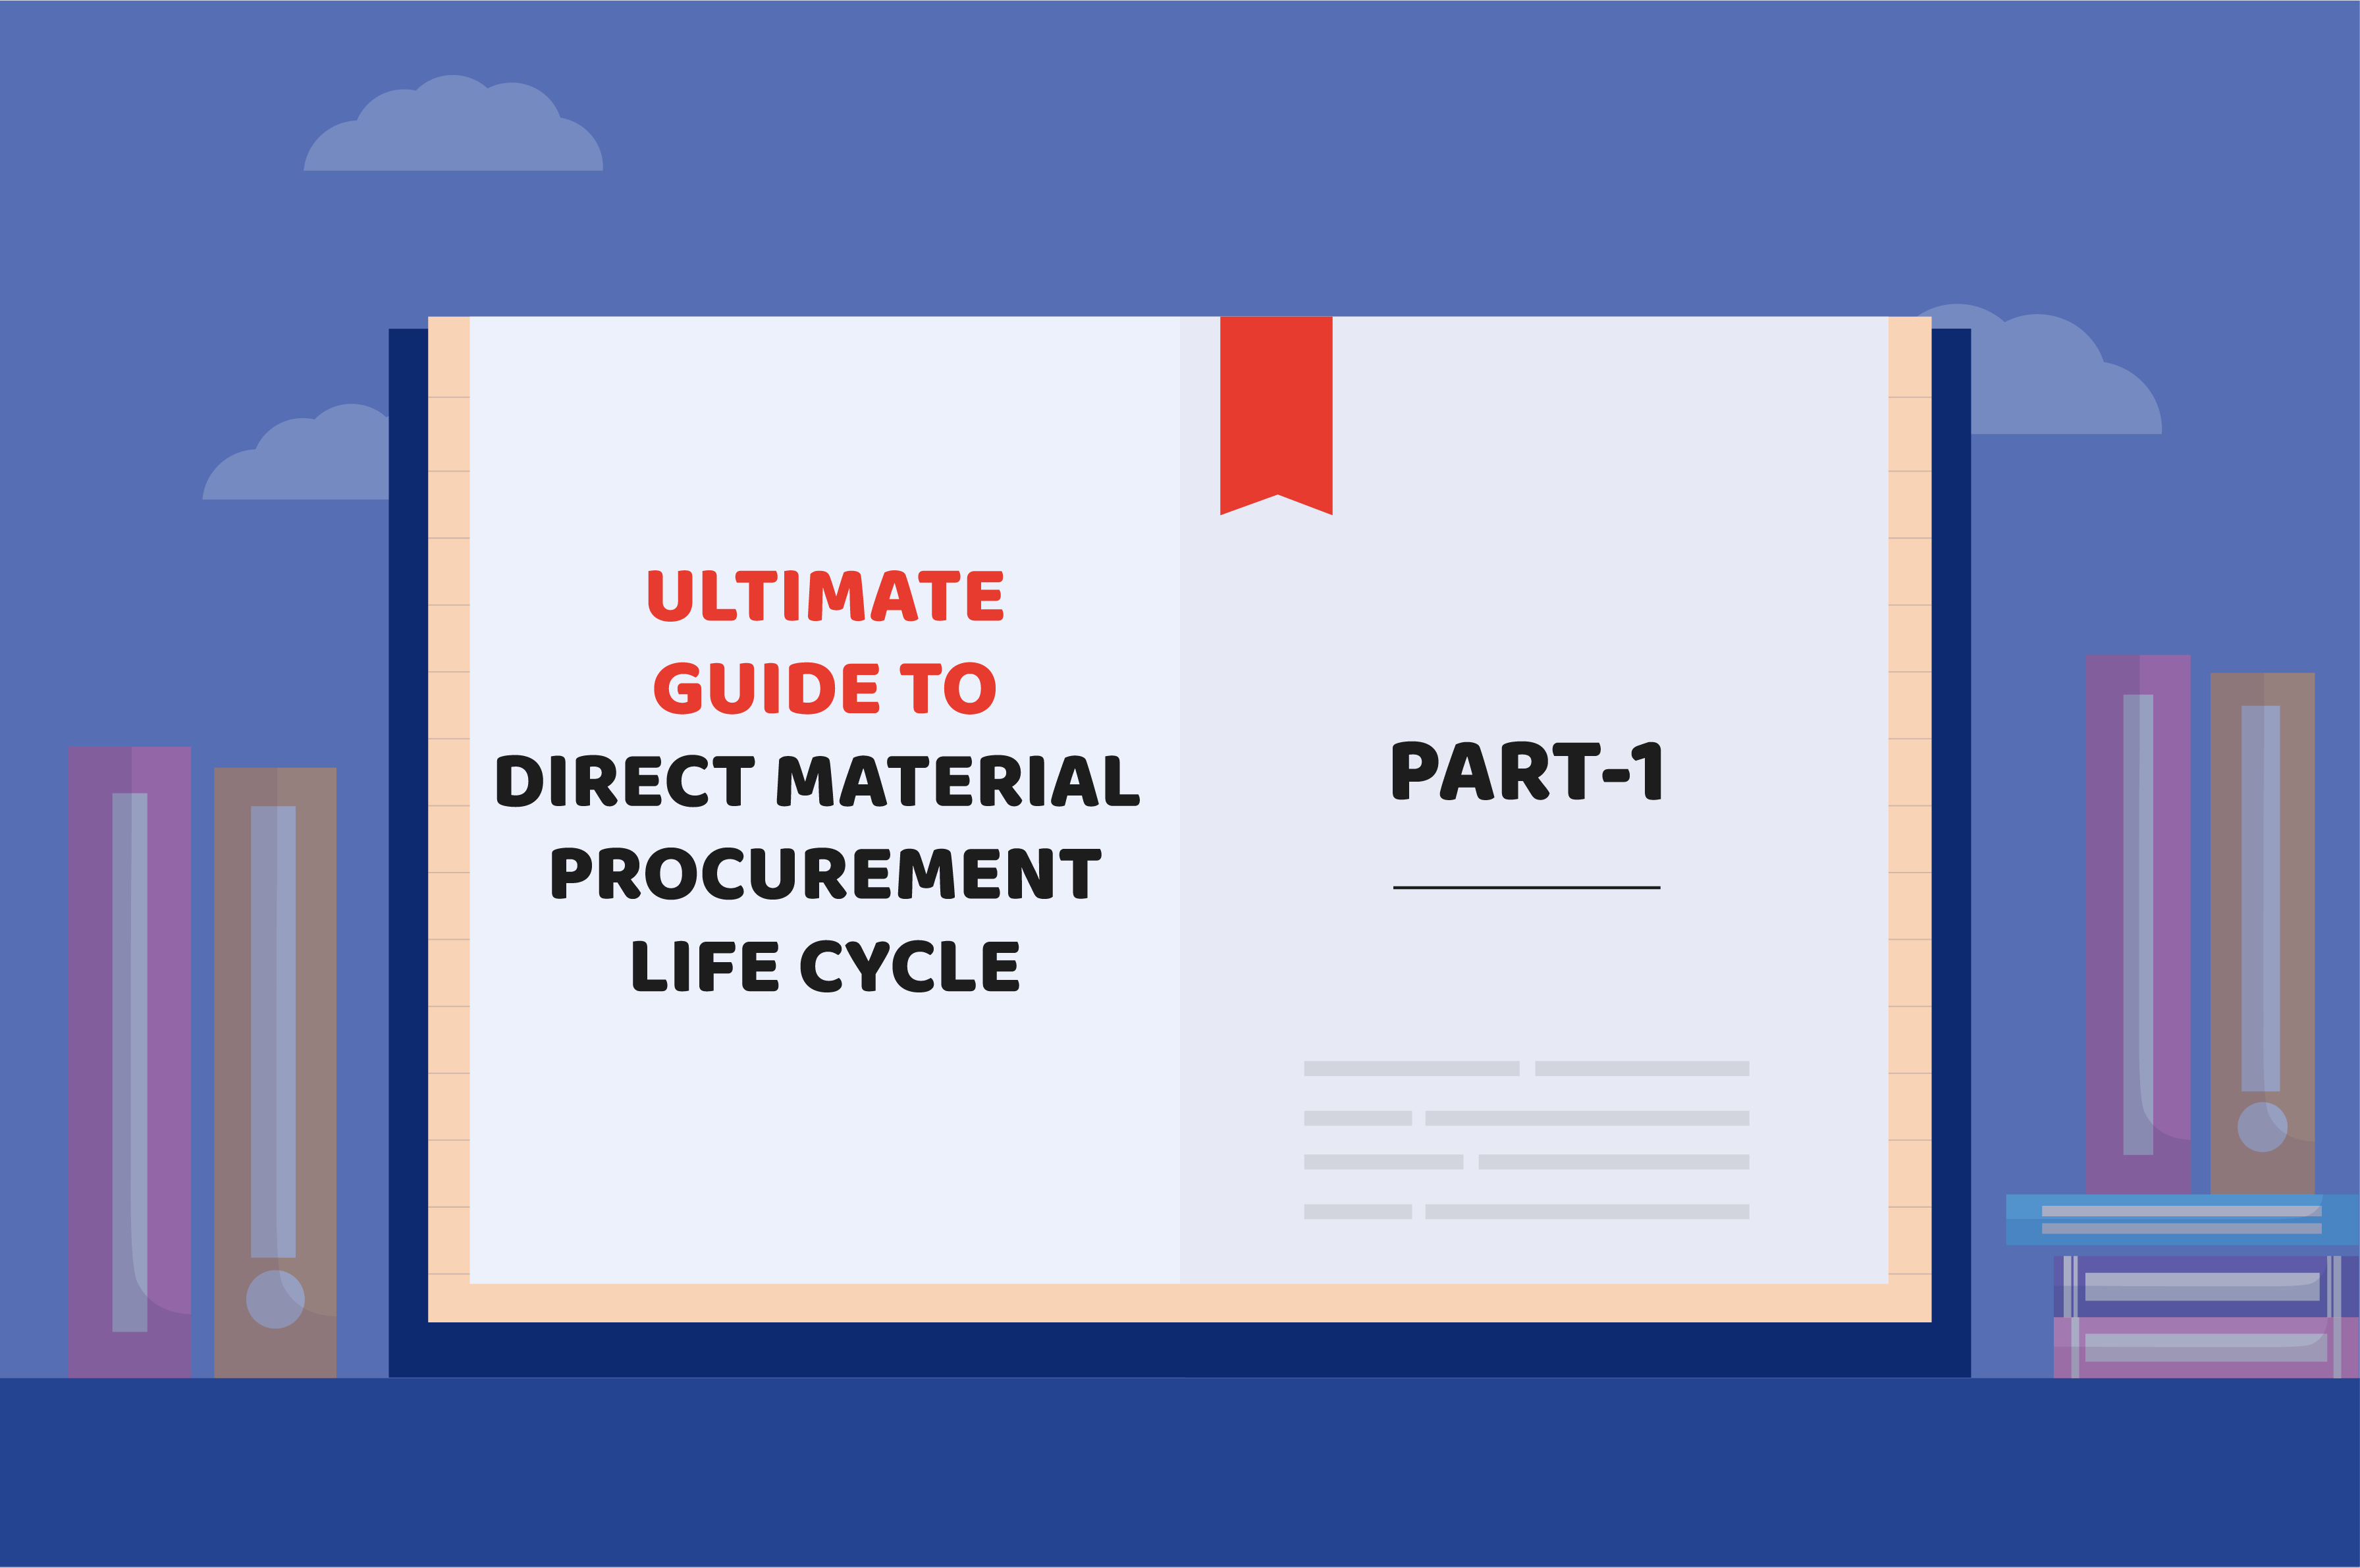 Direct Material Procurement Life Cycle Guide - Part 1